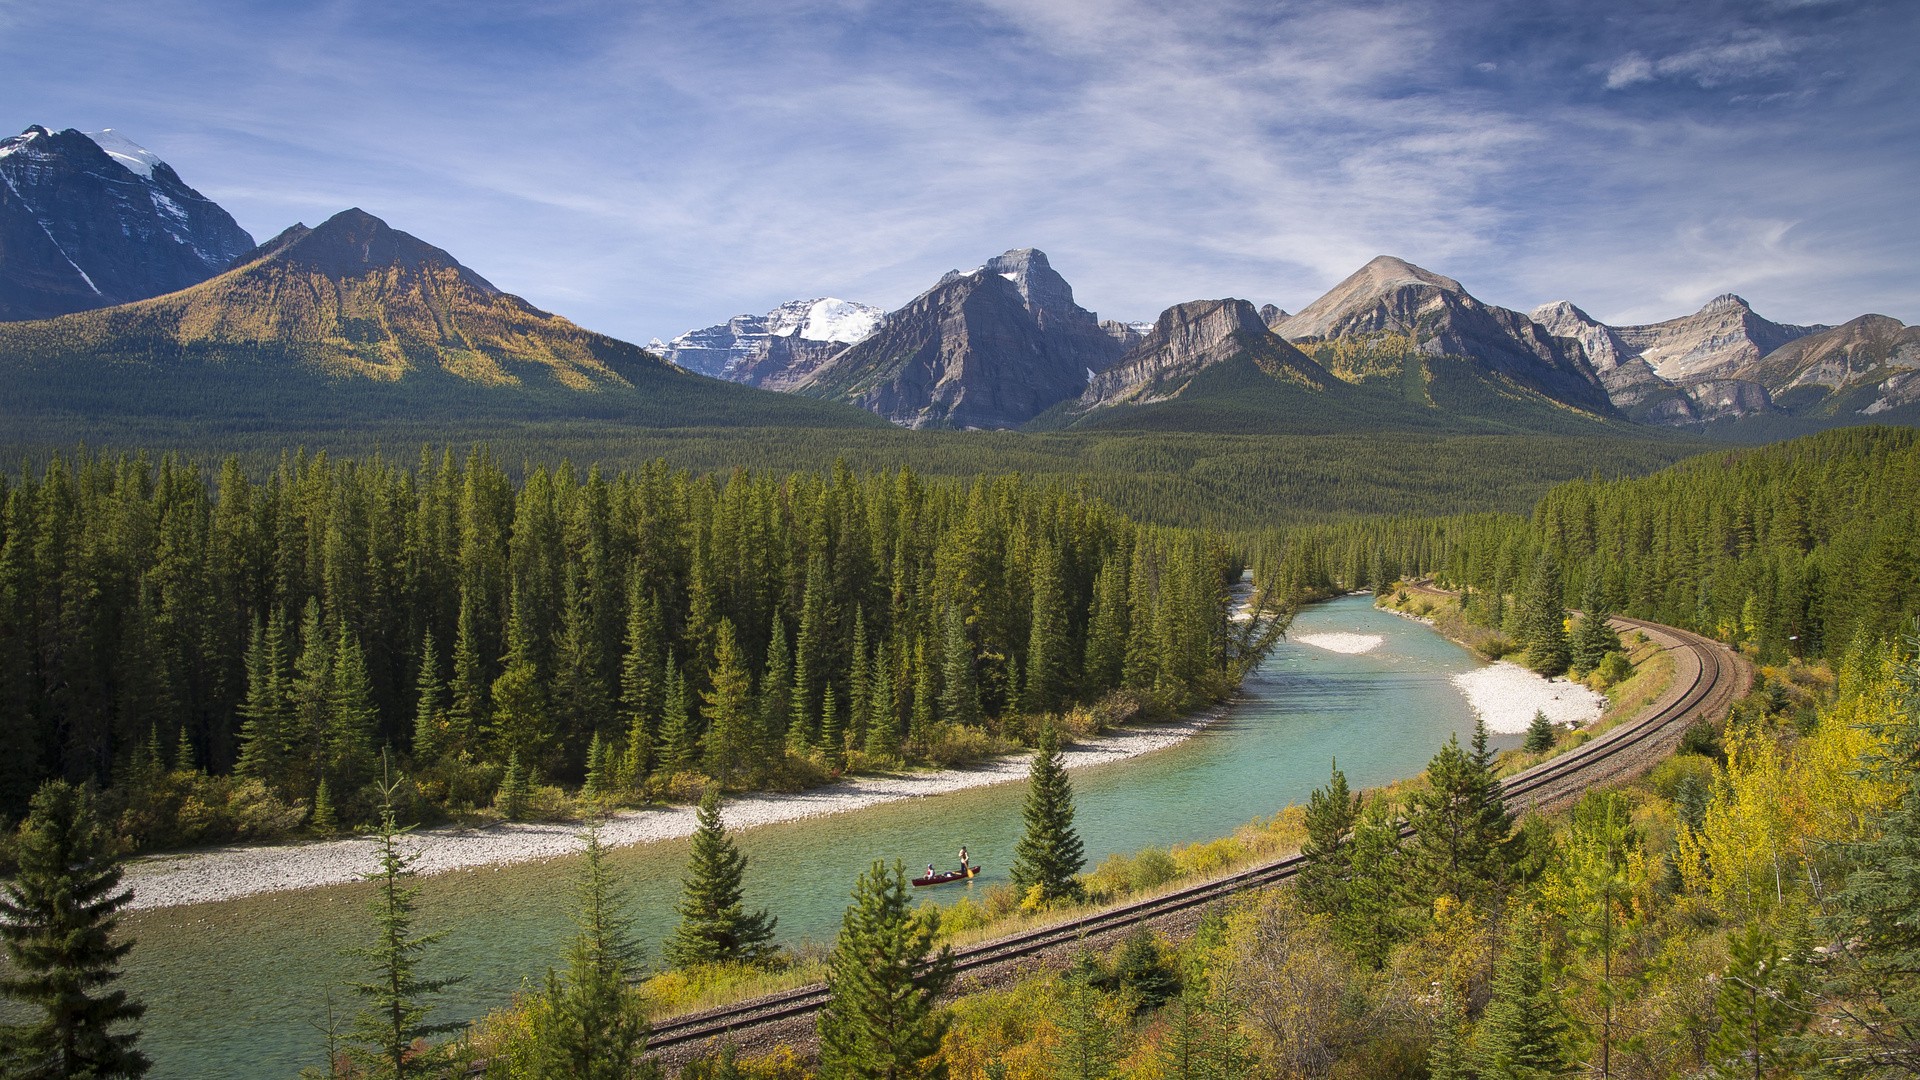 General 1920x1080 Canada river railway mountains forest landscape nature